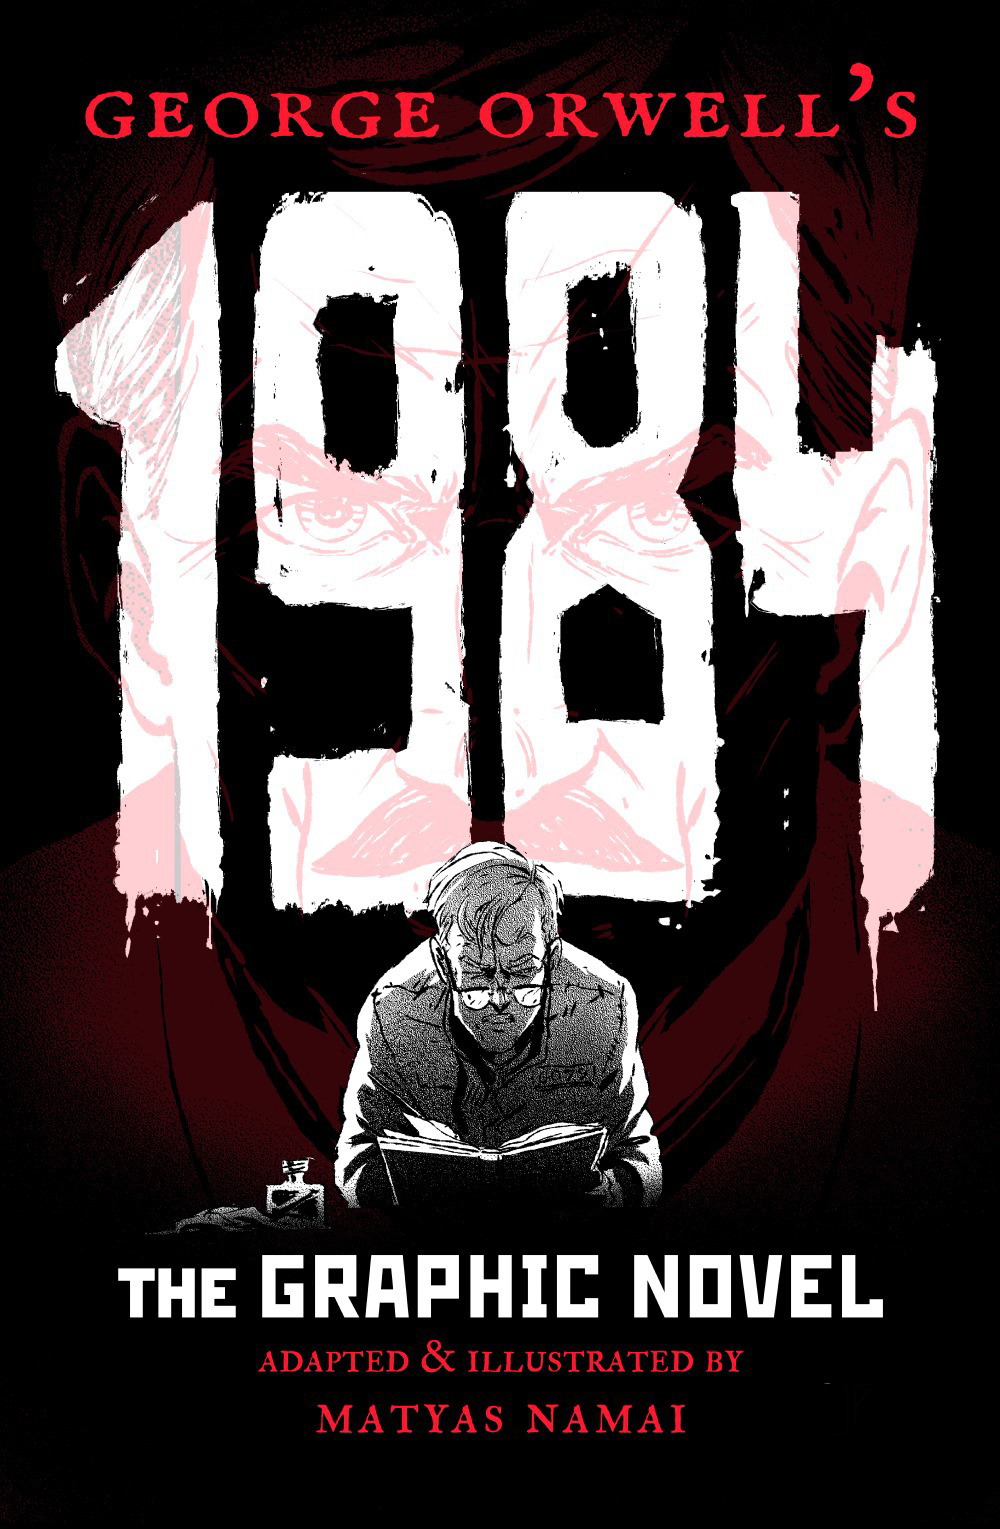 BOOK REVIEW: George Orwell’s 1984 - Adapted by Matyáš Namai 1